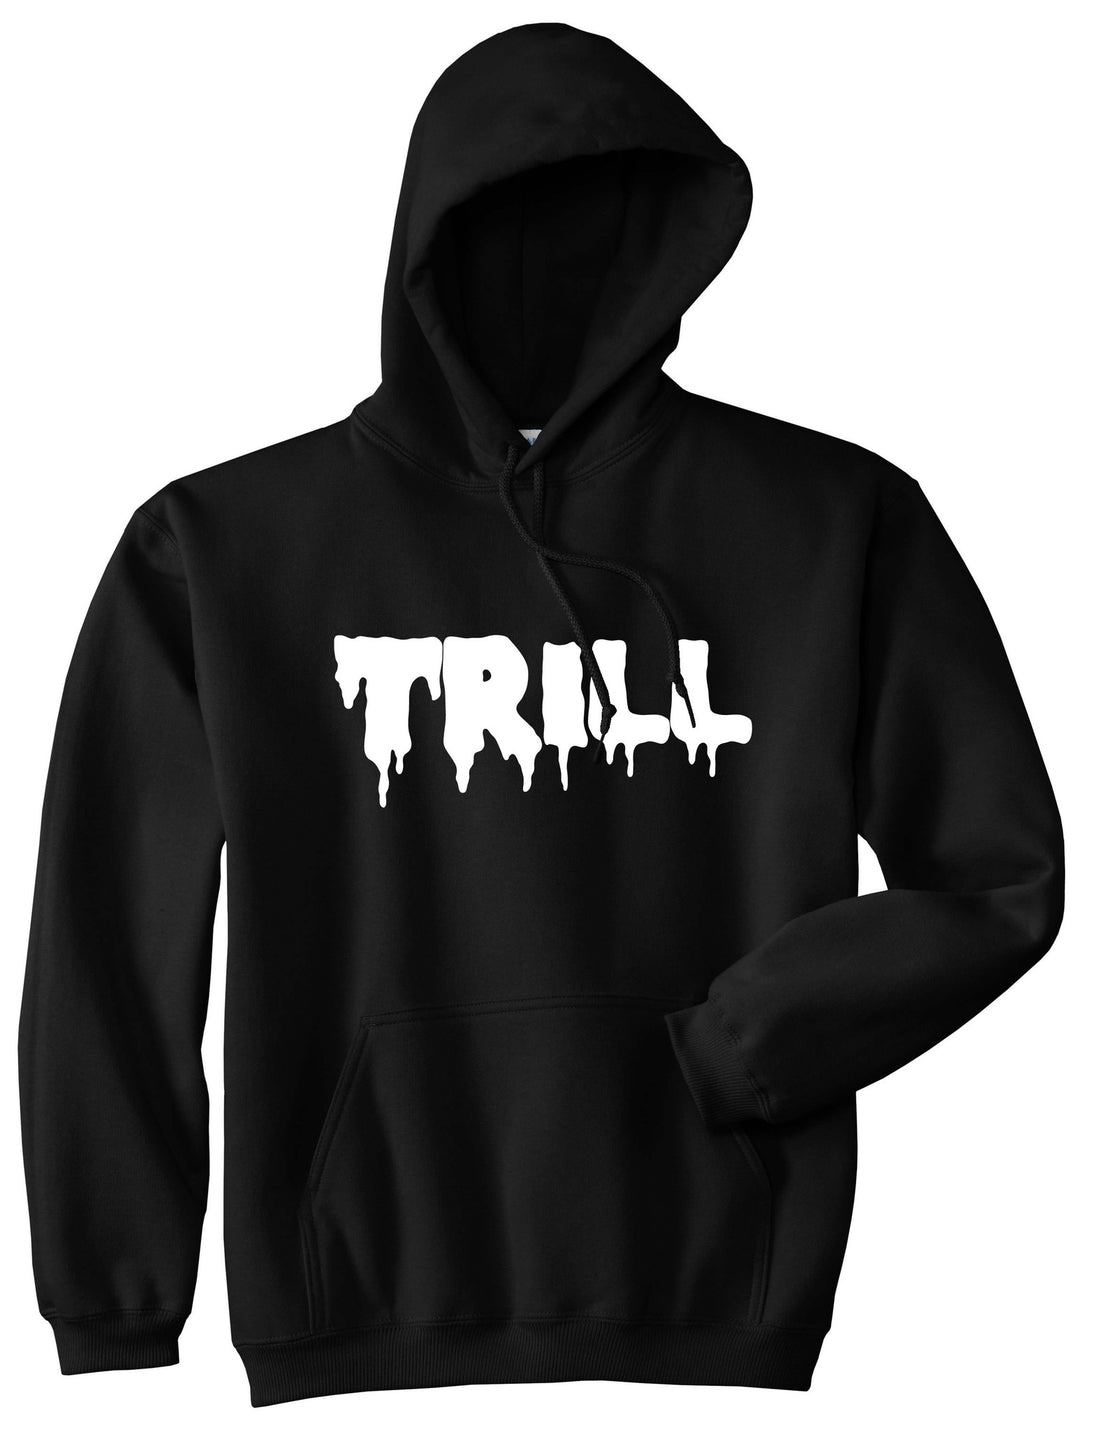 Trill Blood New York Bx Been Style Fashion Boys Kids Pullover Hoodie Hoody In Black by Kings Of NY